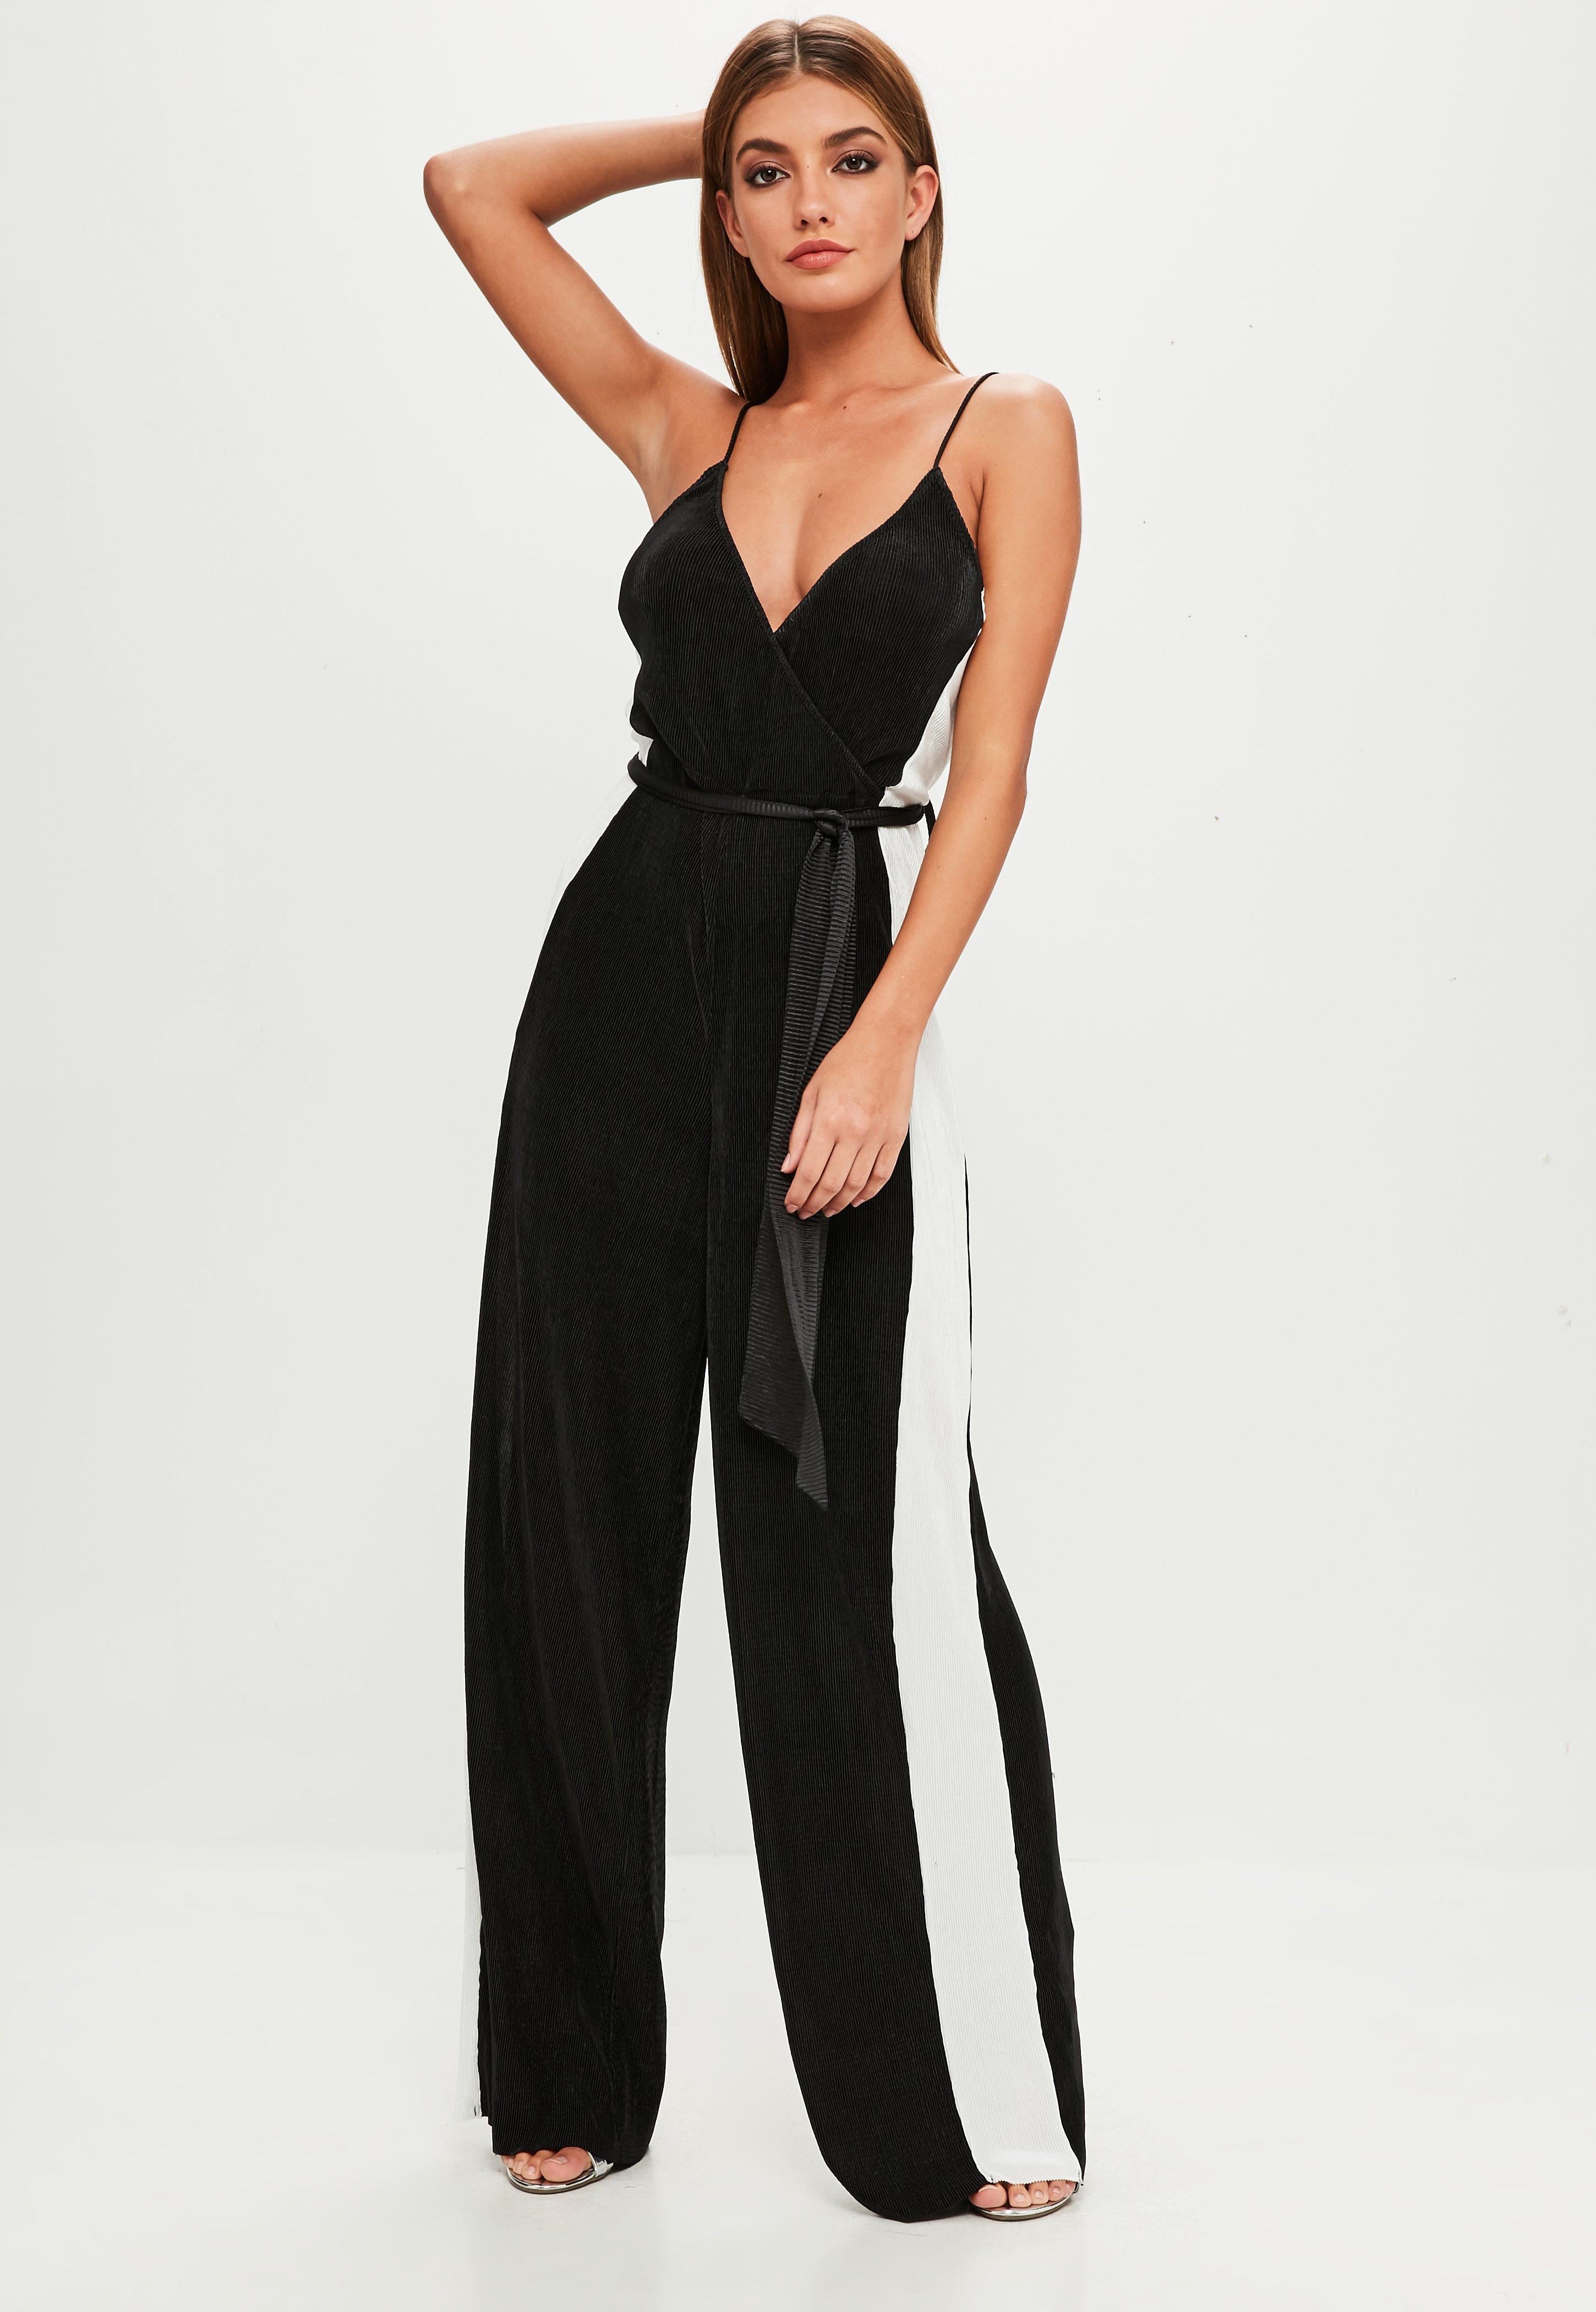 Lyst - Missguided Black Wrap Over Jumpsuit in Black